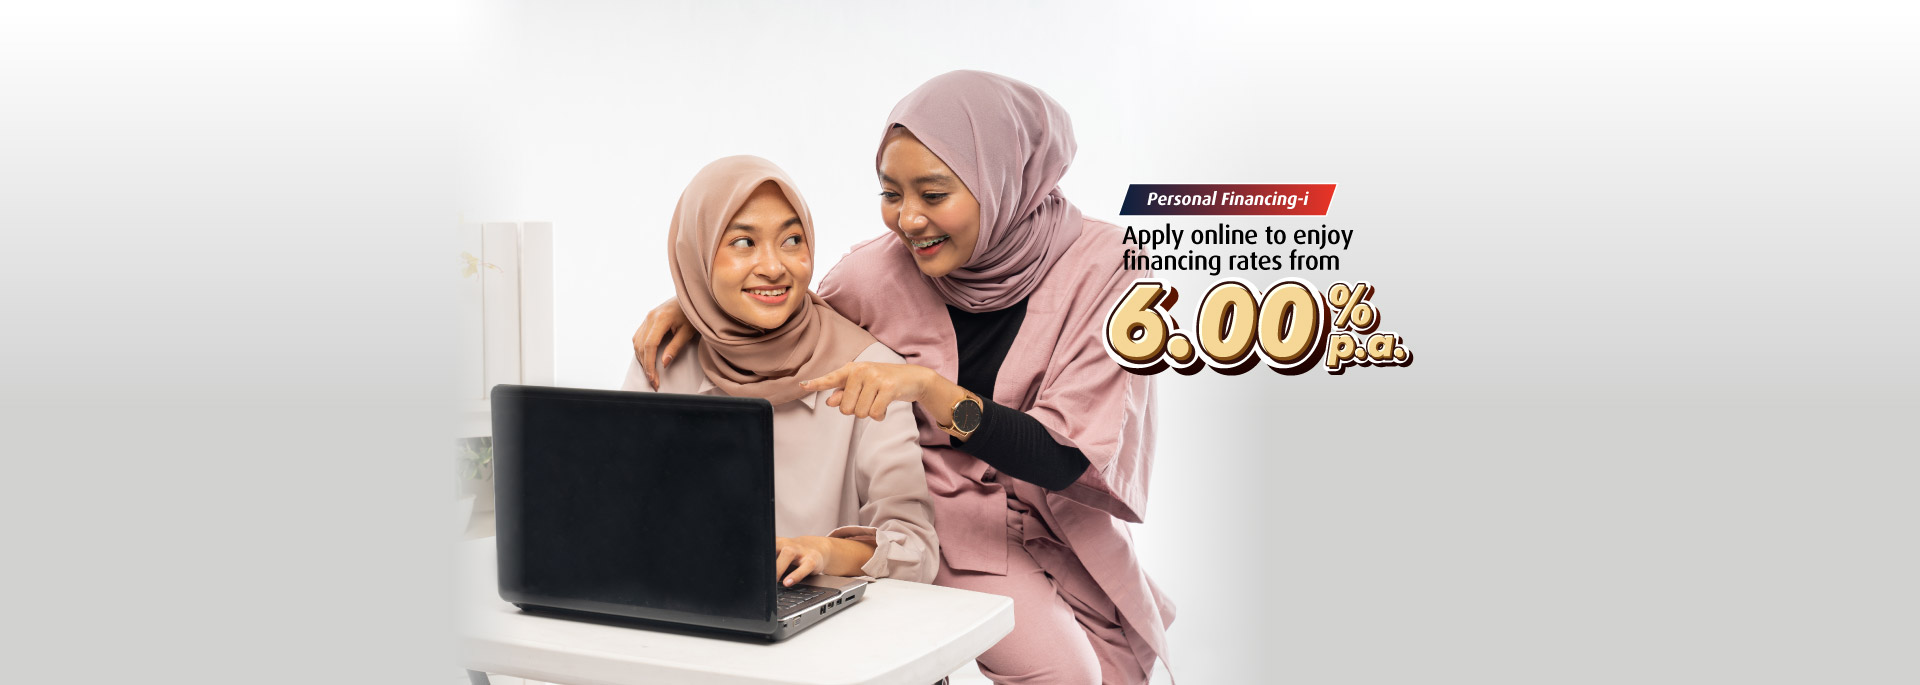 Financing rates from 5.00% p.a. when you apply Online or on Connect Online Banking*